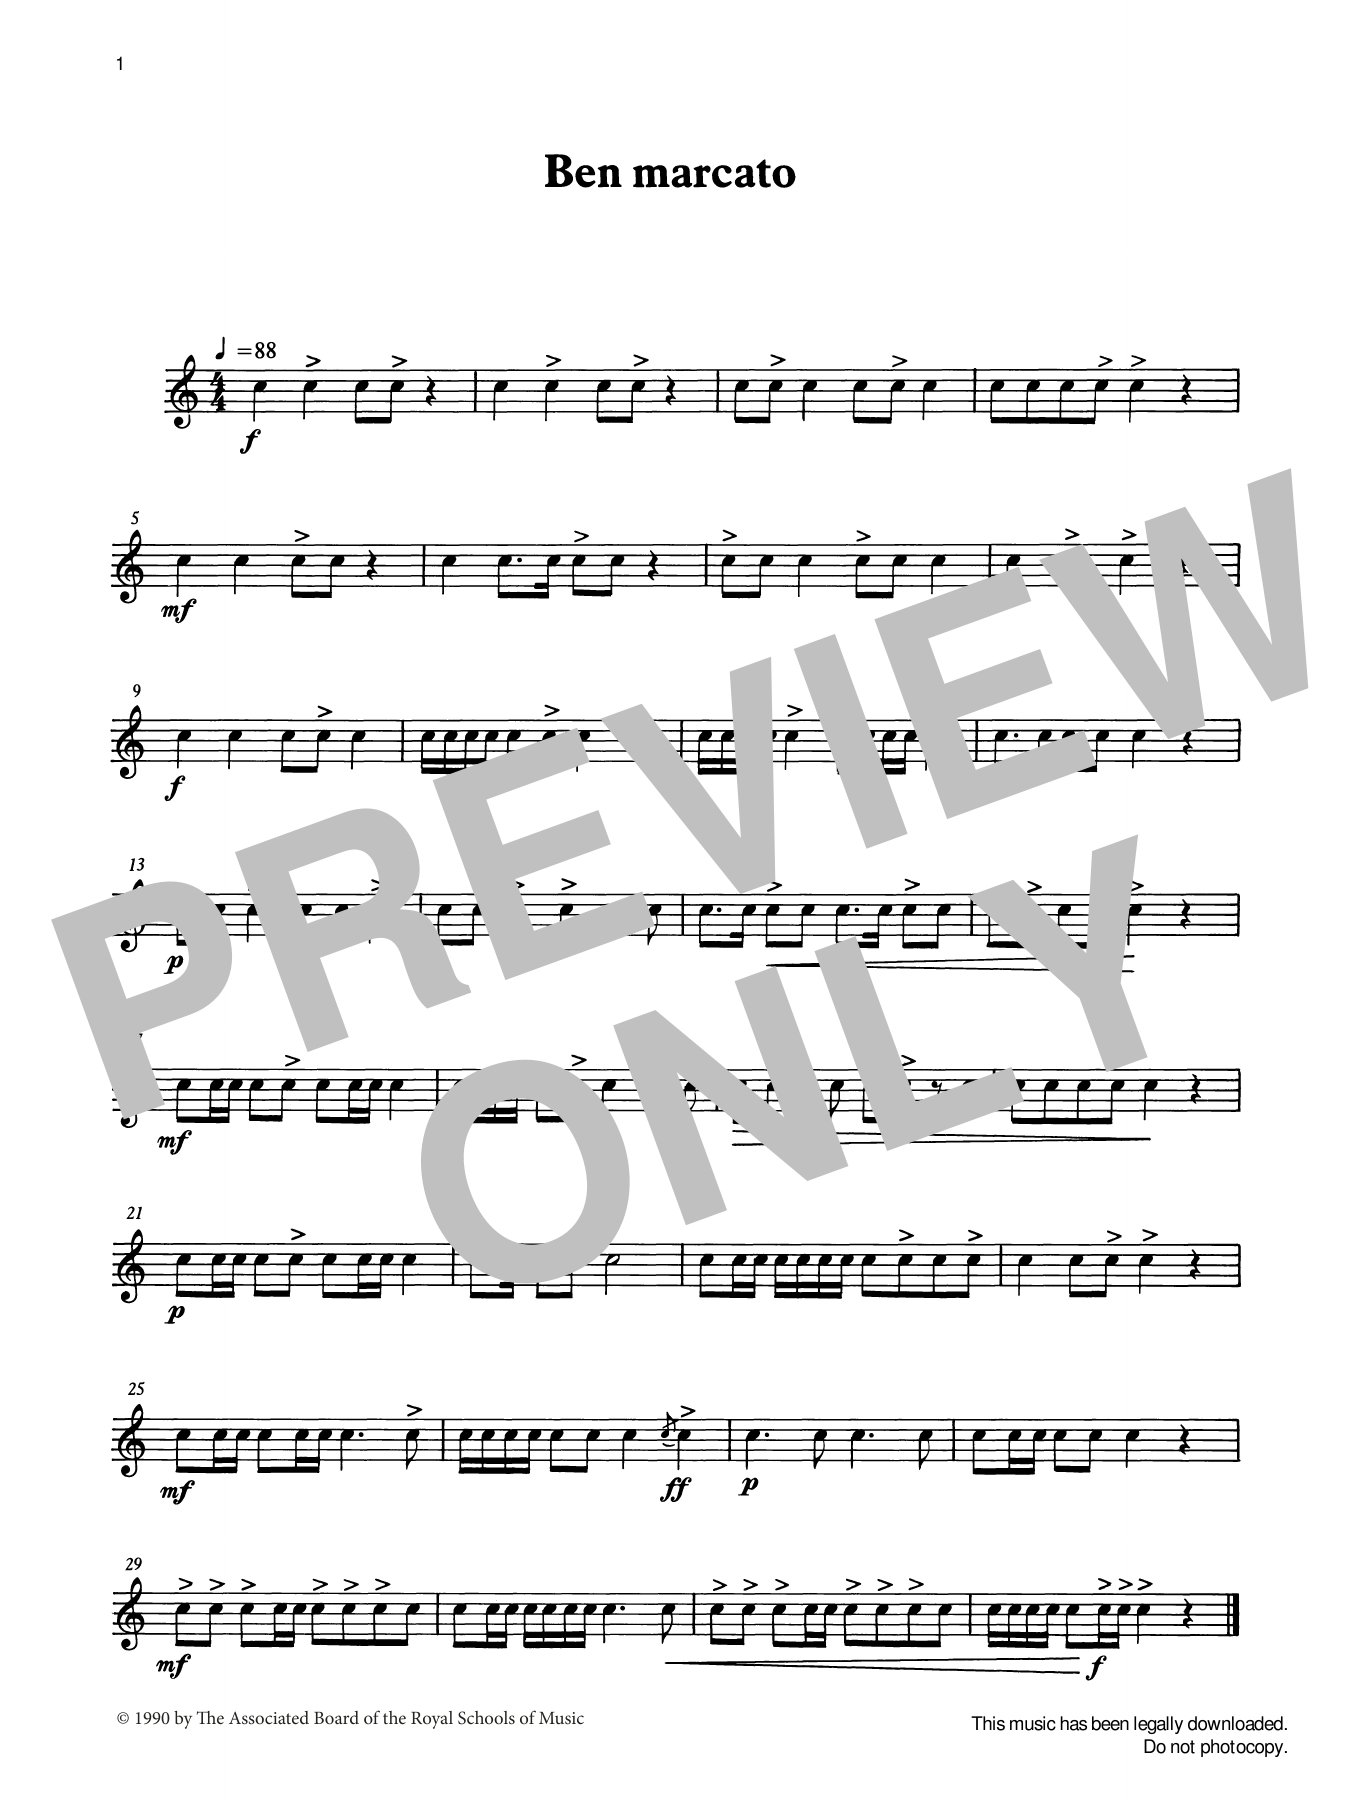 Download Ian Wright and Kevin Hathaway Ben marcato from Graded Music for Snare Sheet Music